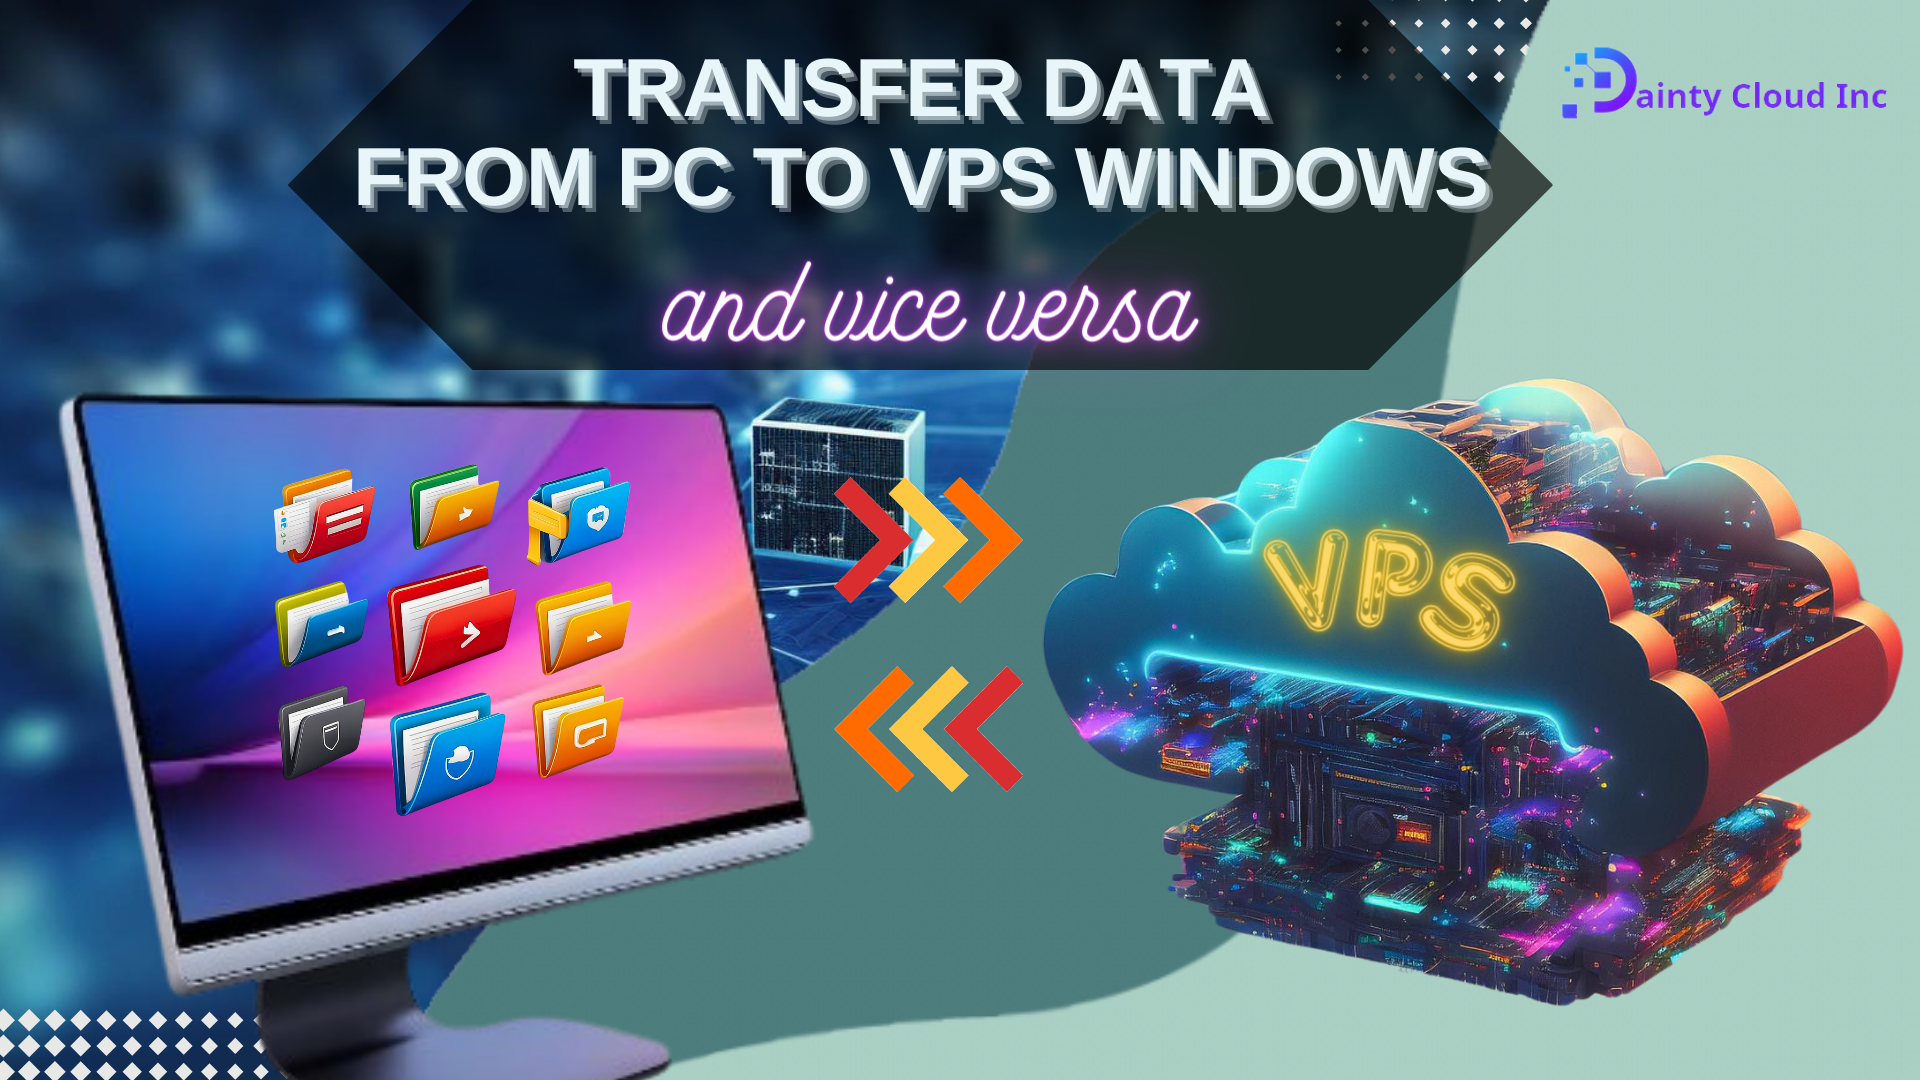 Instructions for transfer data from PC to VPS Windows and vice versa